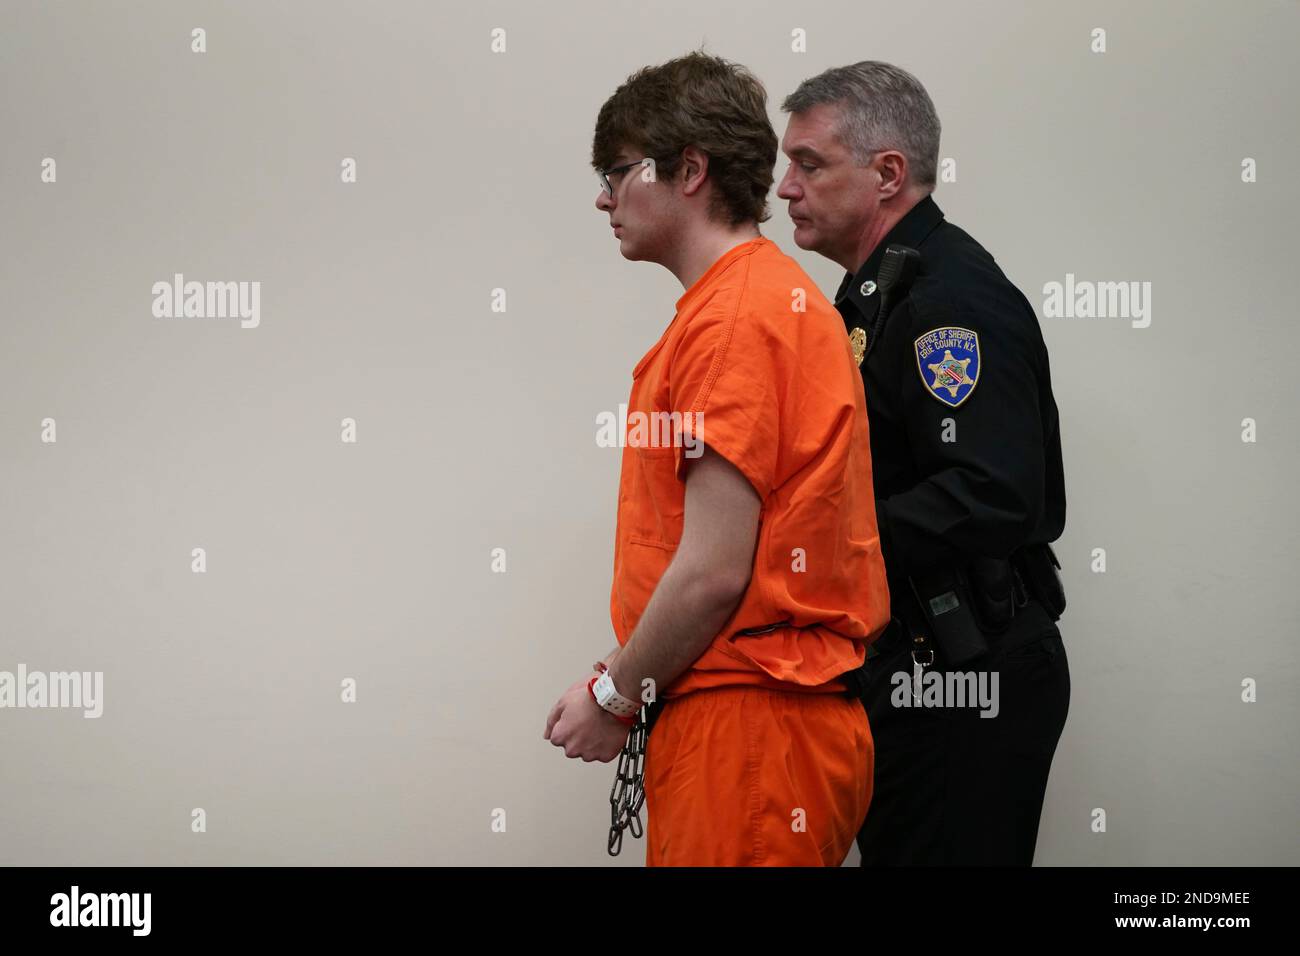 Payton Gendron is escorted out of the courtroom after he was sentenced